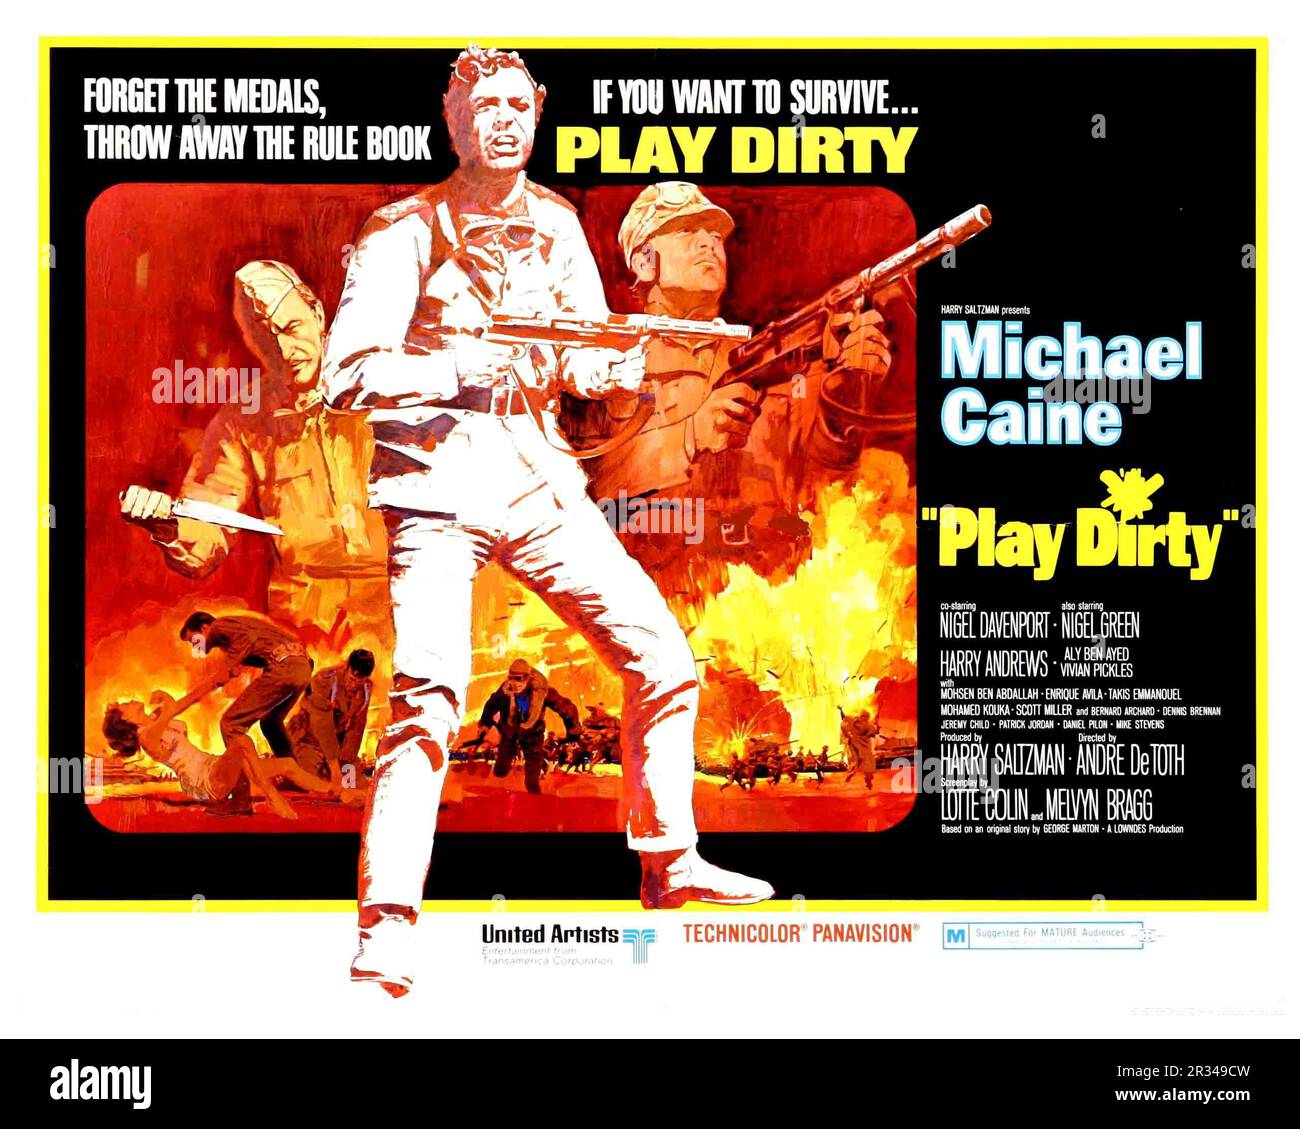 PLAY DIRTY (1968), directed by ANDRE DE TOTH. Credit: LOWNDES PRODUCTIONS LIMITED / Album Stock Photo